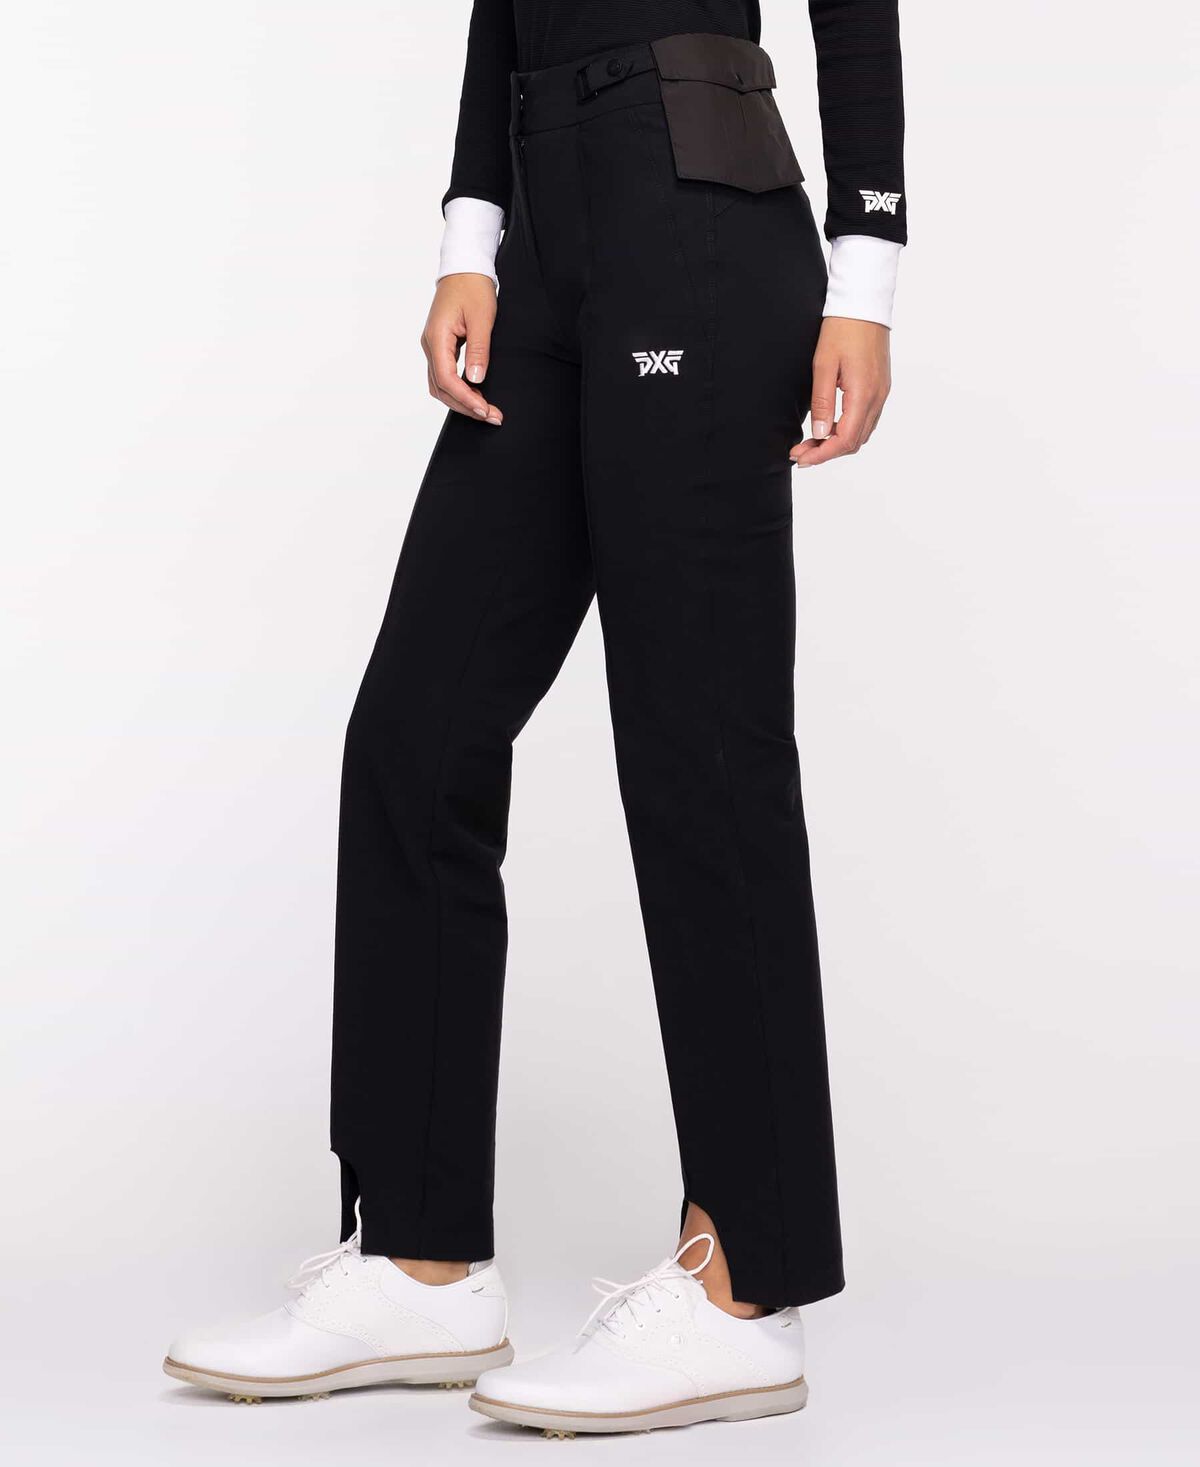 High-Low Ankle Golf Pant | Women's Golf Bottoms | Pants, Skirts, Shorts ...